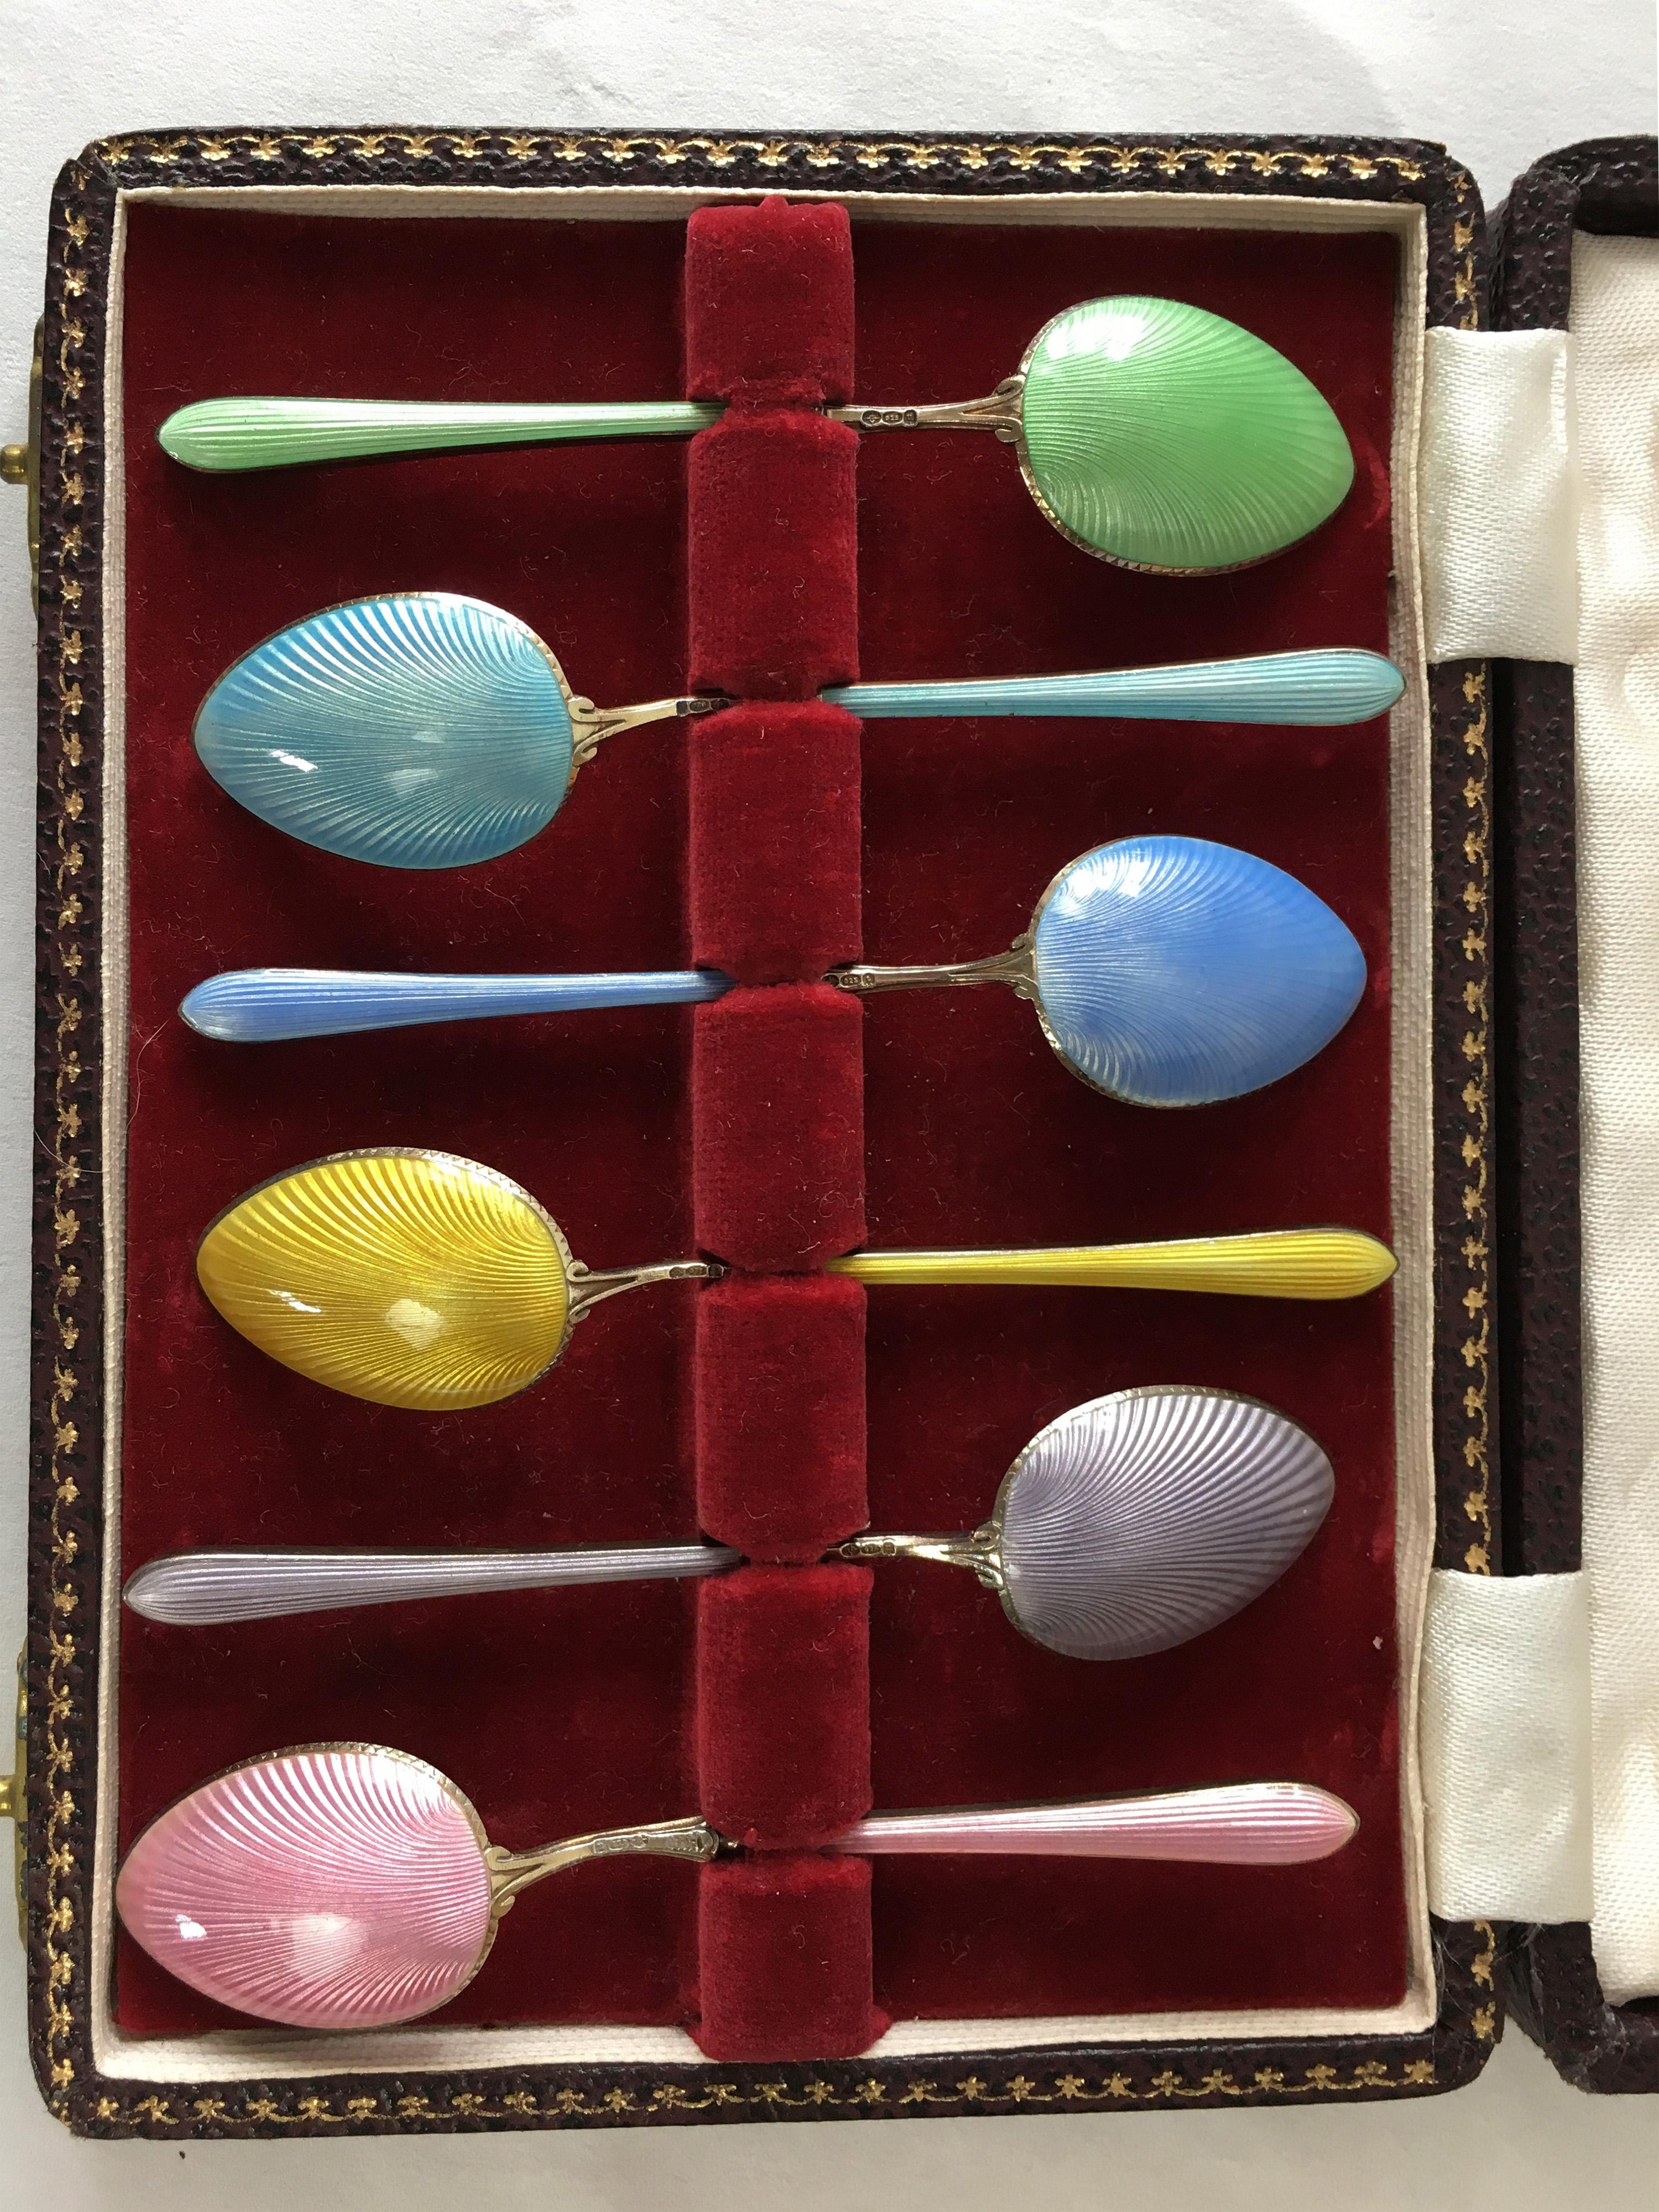 Boxed set of six Norwegian colored guilloche enameled silver teaspoons with gold wash. The spoons in green, turquoise, blue, yellow, pale lavender and pink were probably made to celebrate Queen Elizabeth II’s Coronation in 1953.